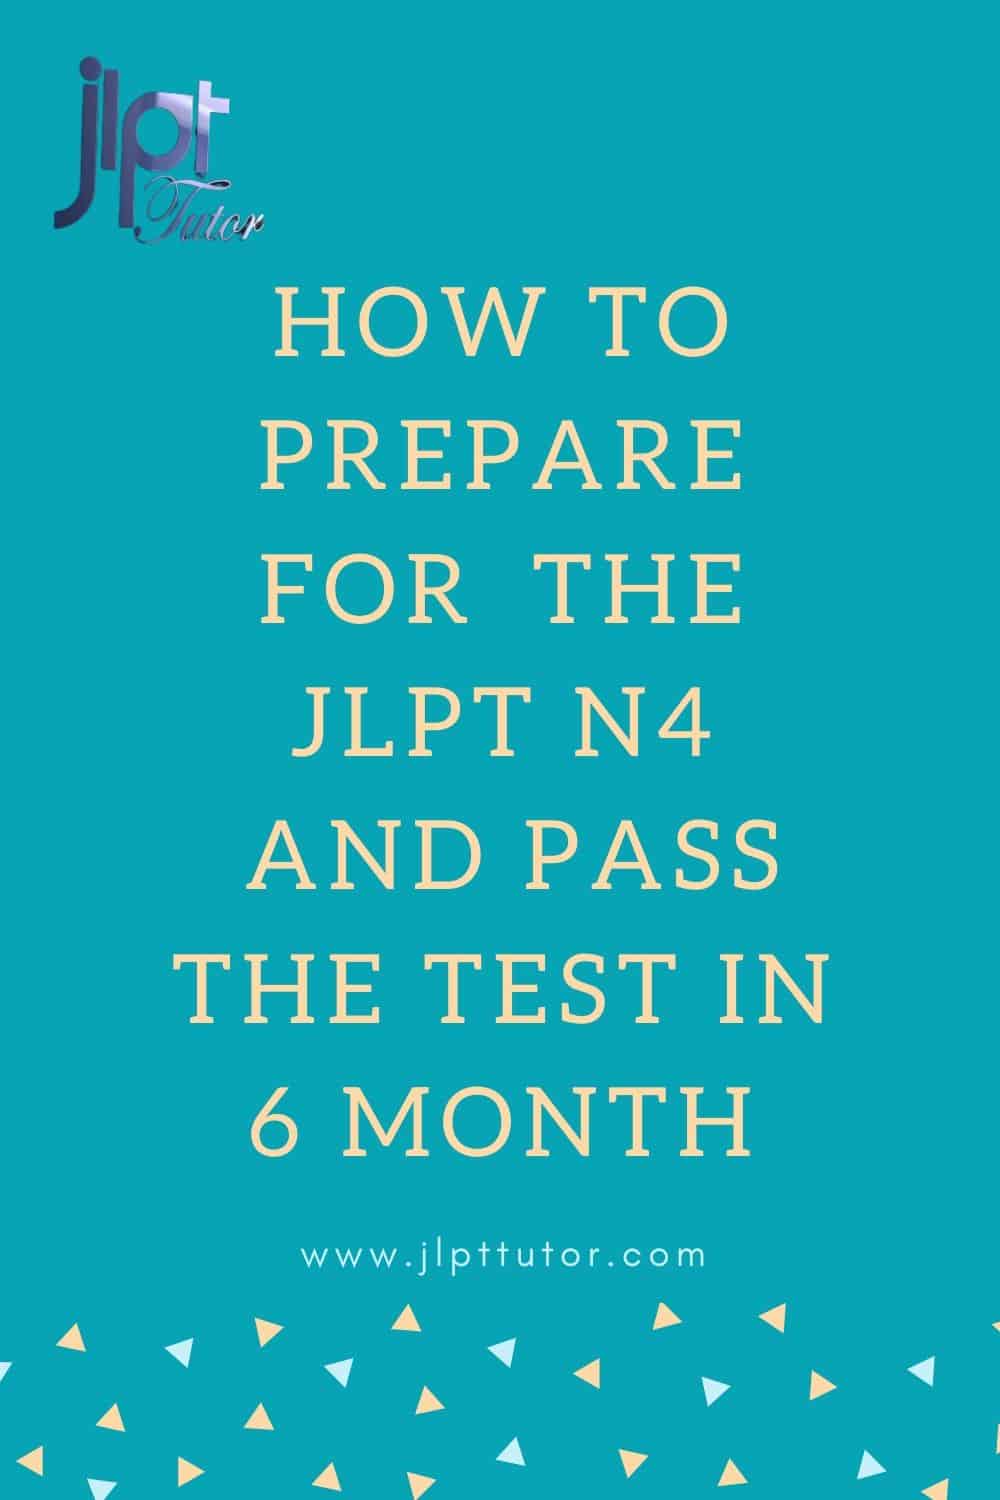 How to prepare for JLPT N4  and pass the test in 6 month